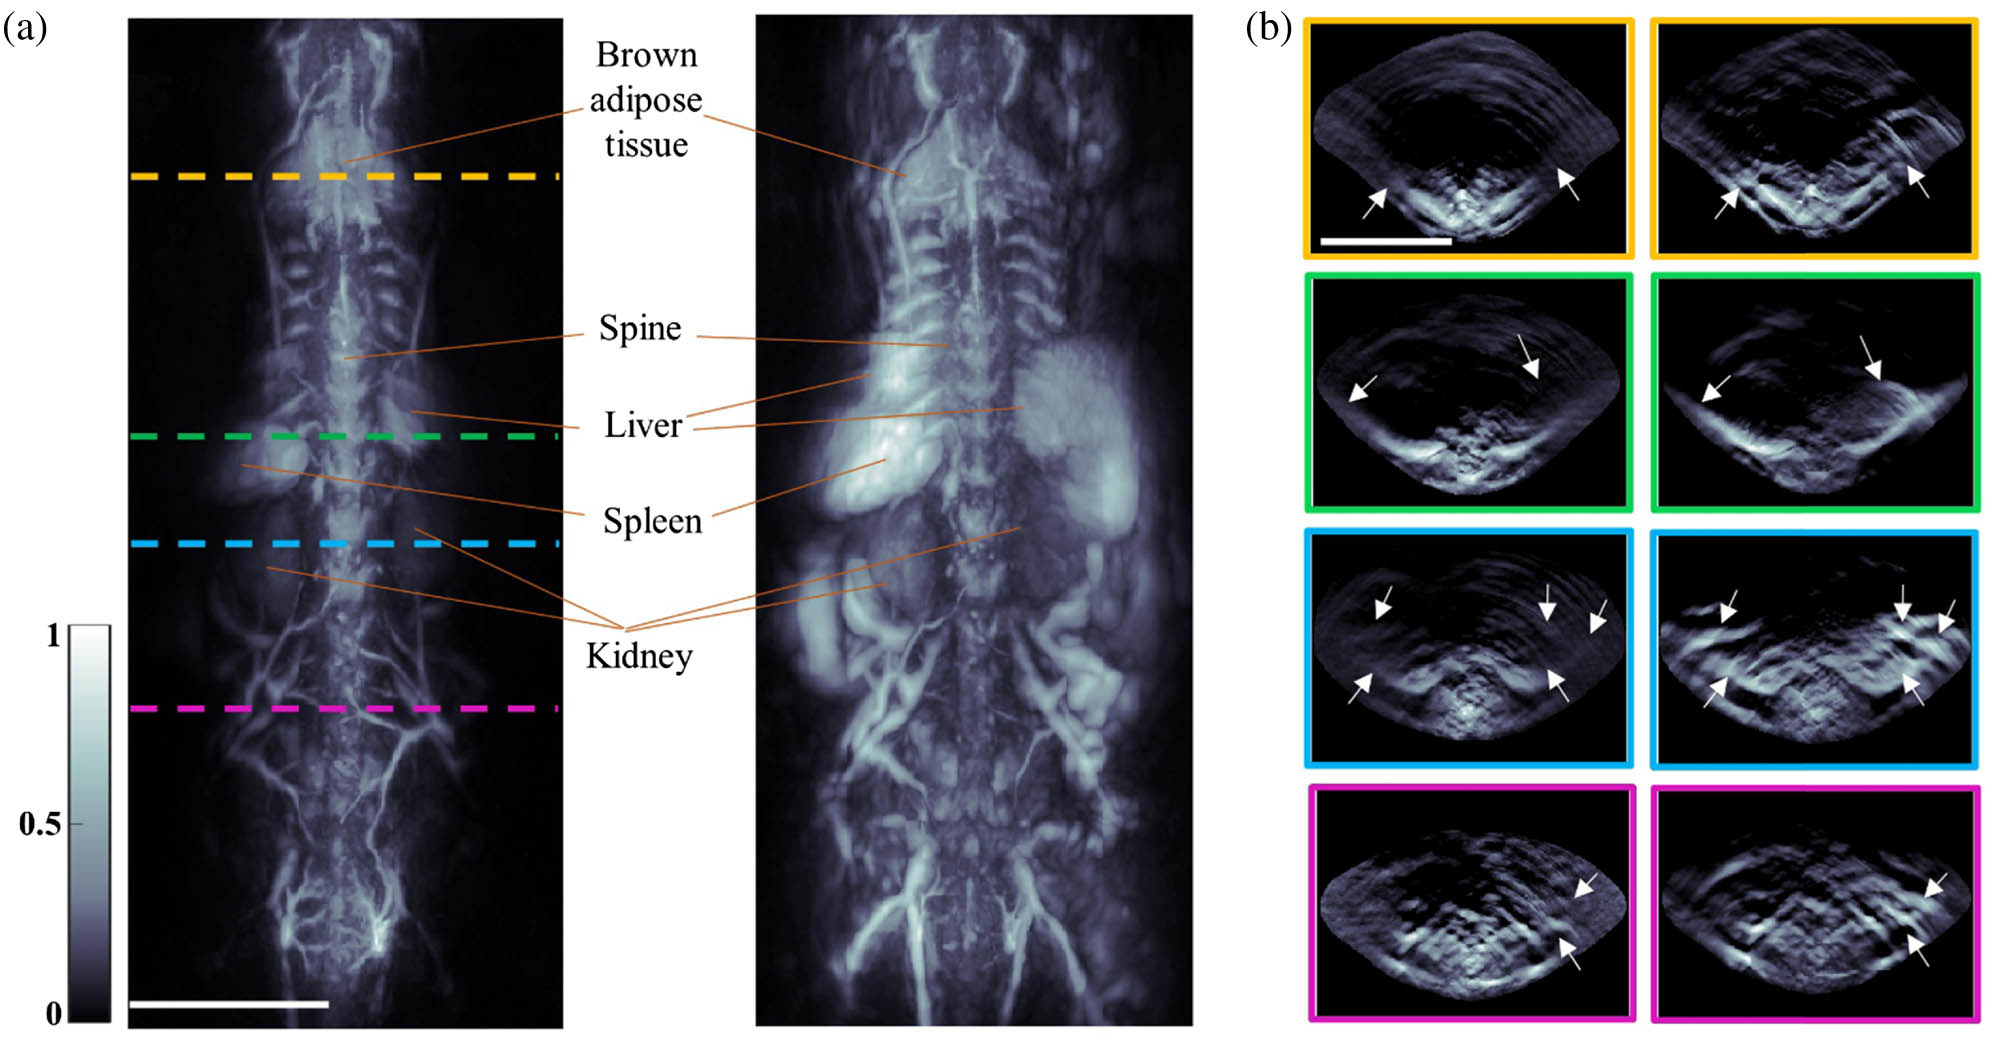 In vivo comparison study between the single-beam and multibeam illumination approaches. (a) Images reconstructed after single vertical sweeps using single-beam (left) and multibeam (right) illuminations. (b) Fluence corrected cross-sectional reconstructions (MIPs over 1 mm thickness) at several anatomical positions along the animal: (left) using single-beam and (right) using multibeam illumination. Arrows point to the differences. Scale bar: 1 cm.